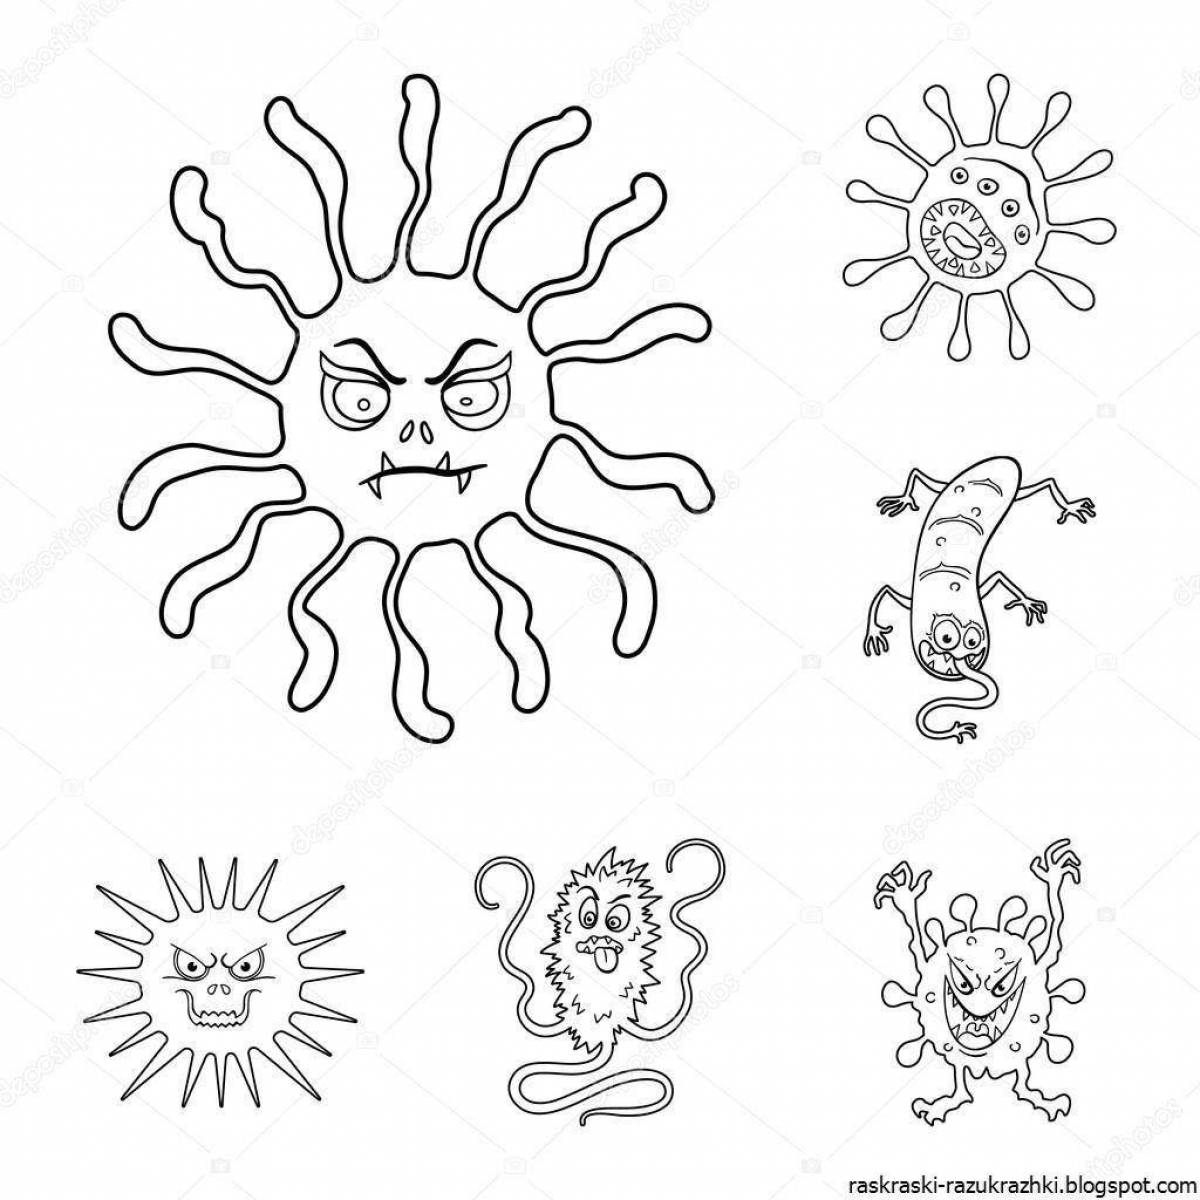 Cute microbes coloring pages for kids